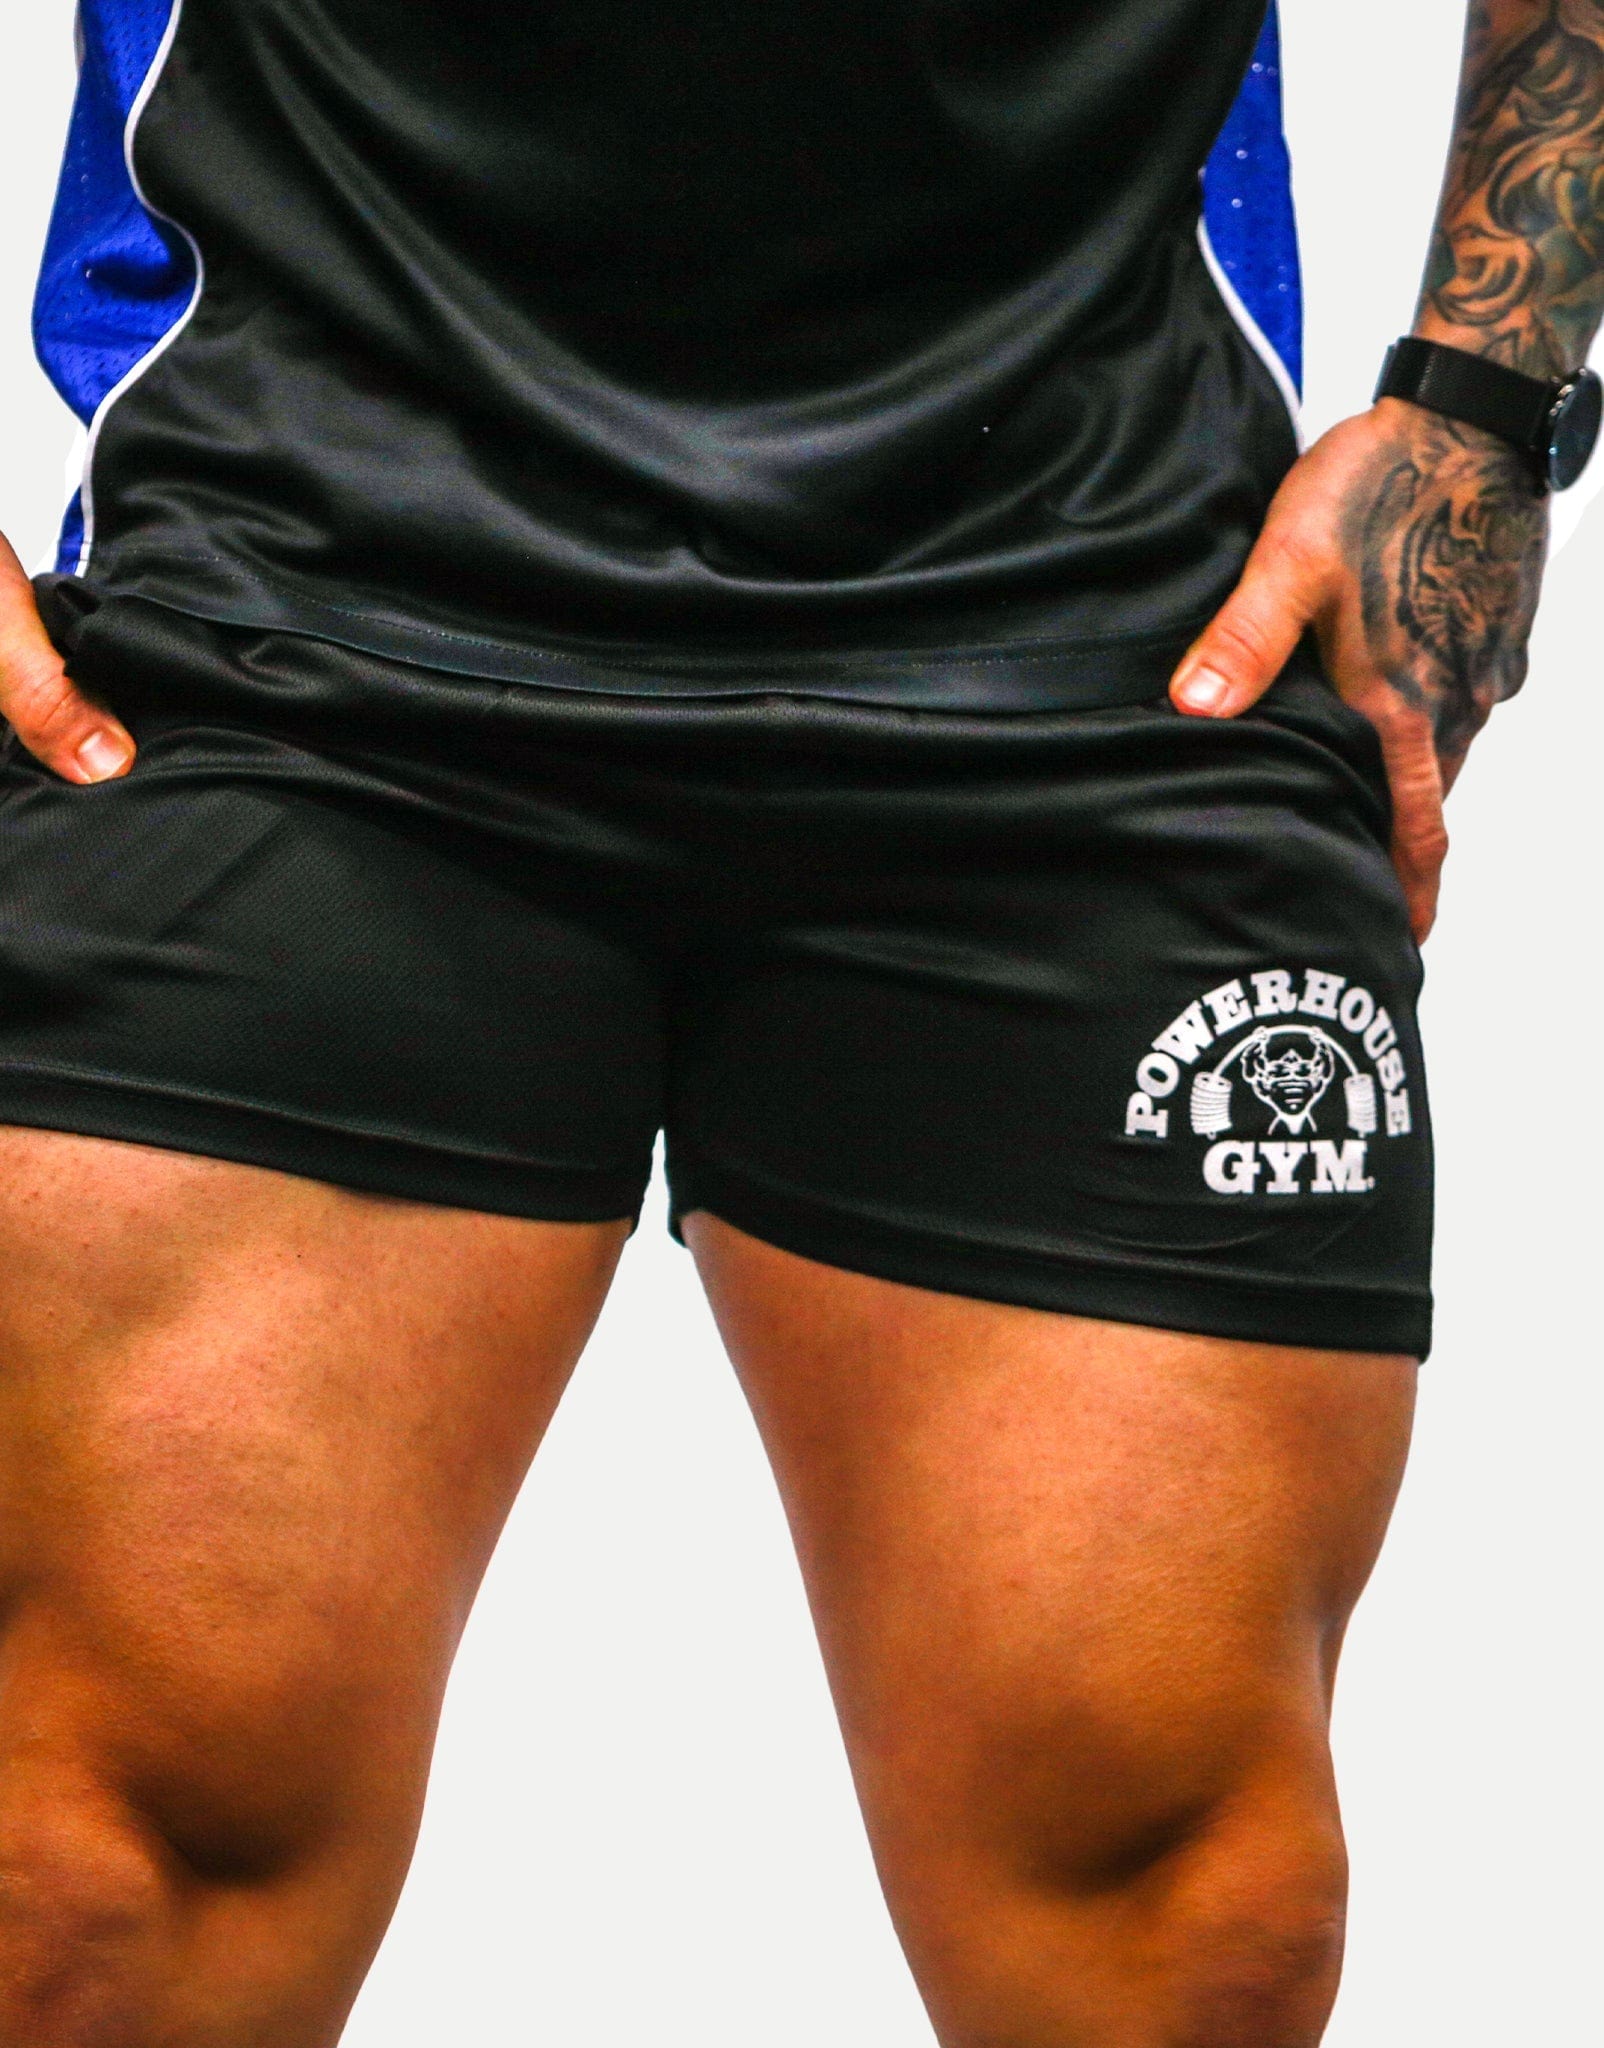 Buy Rexcyril Men's Running Workout Bodybuilding Gym Shorts Athletic Sports  Casual Short Pants, Black, XL at Amazon.in